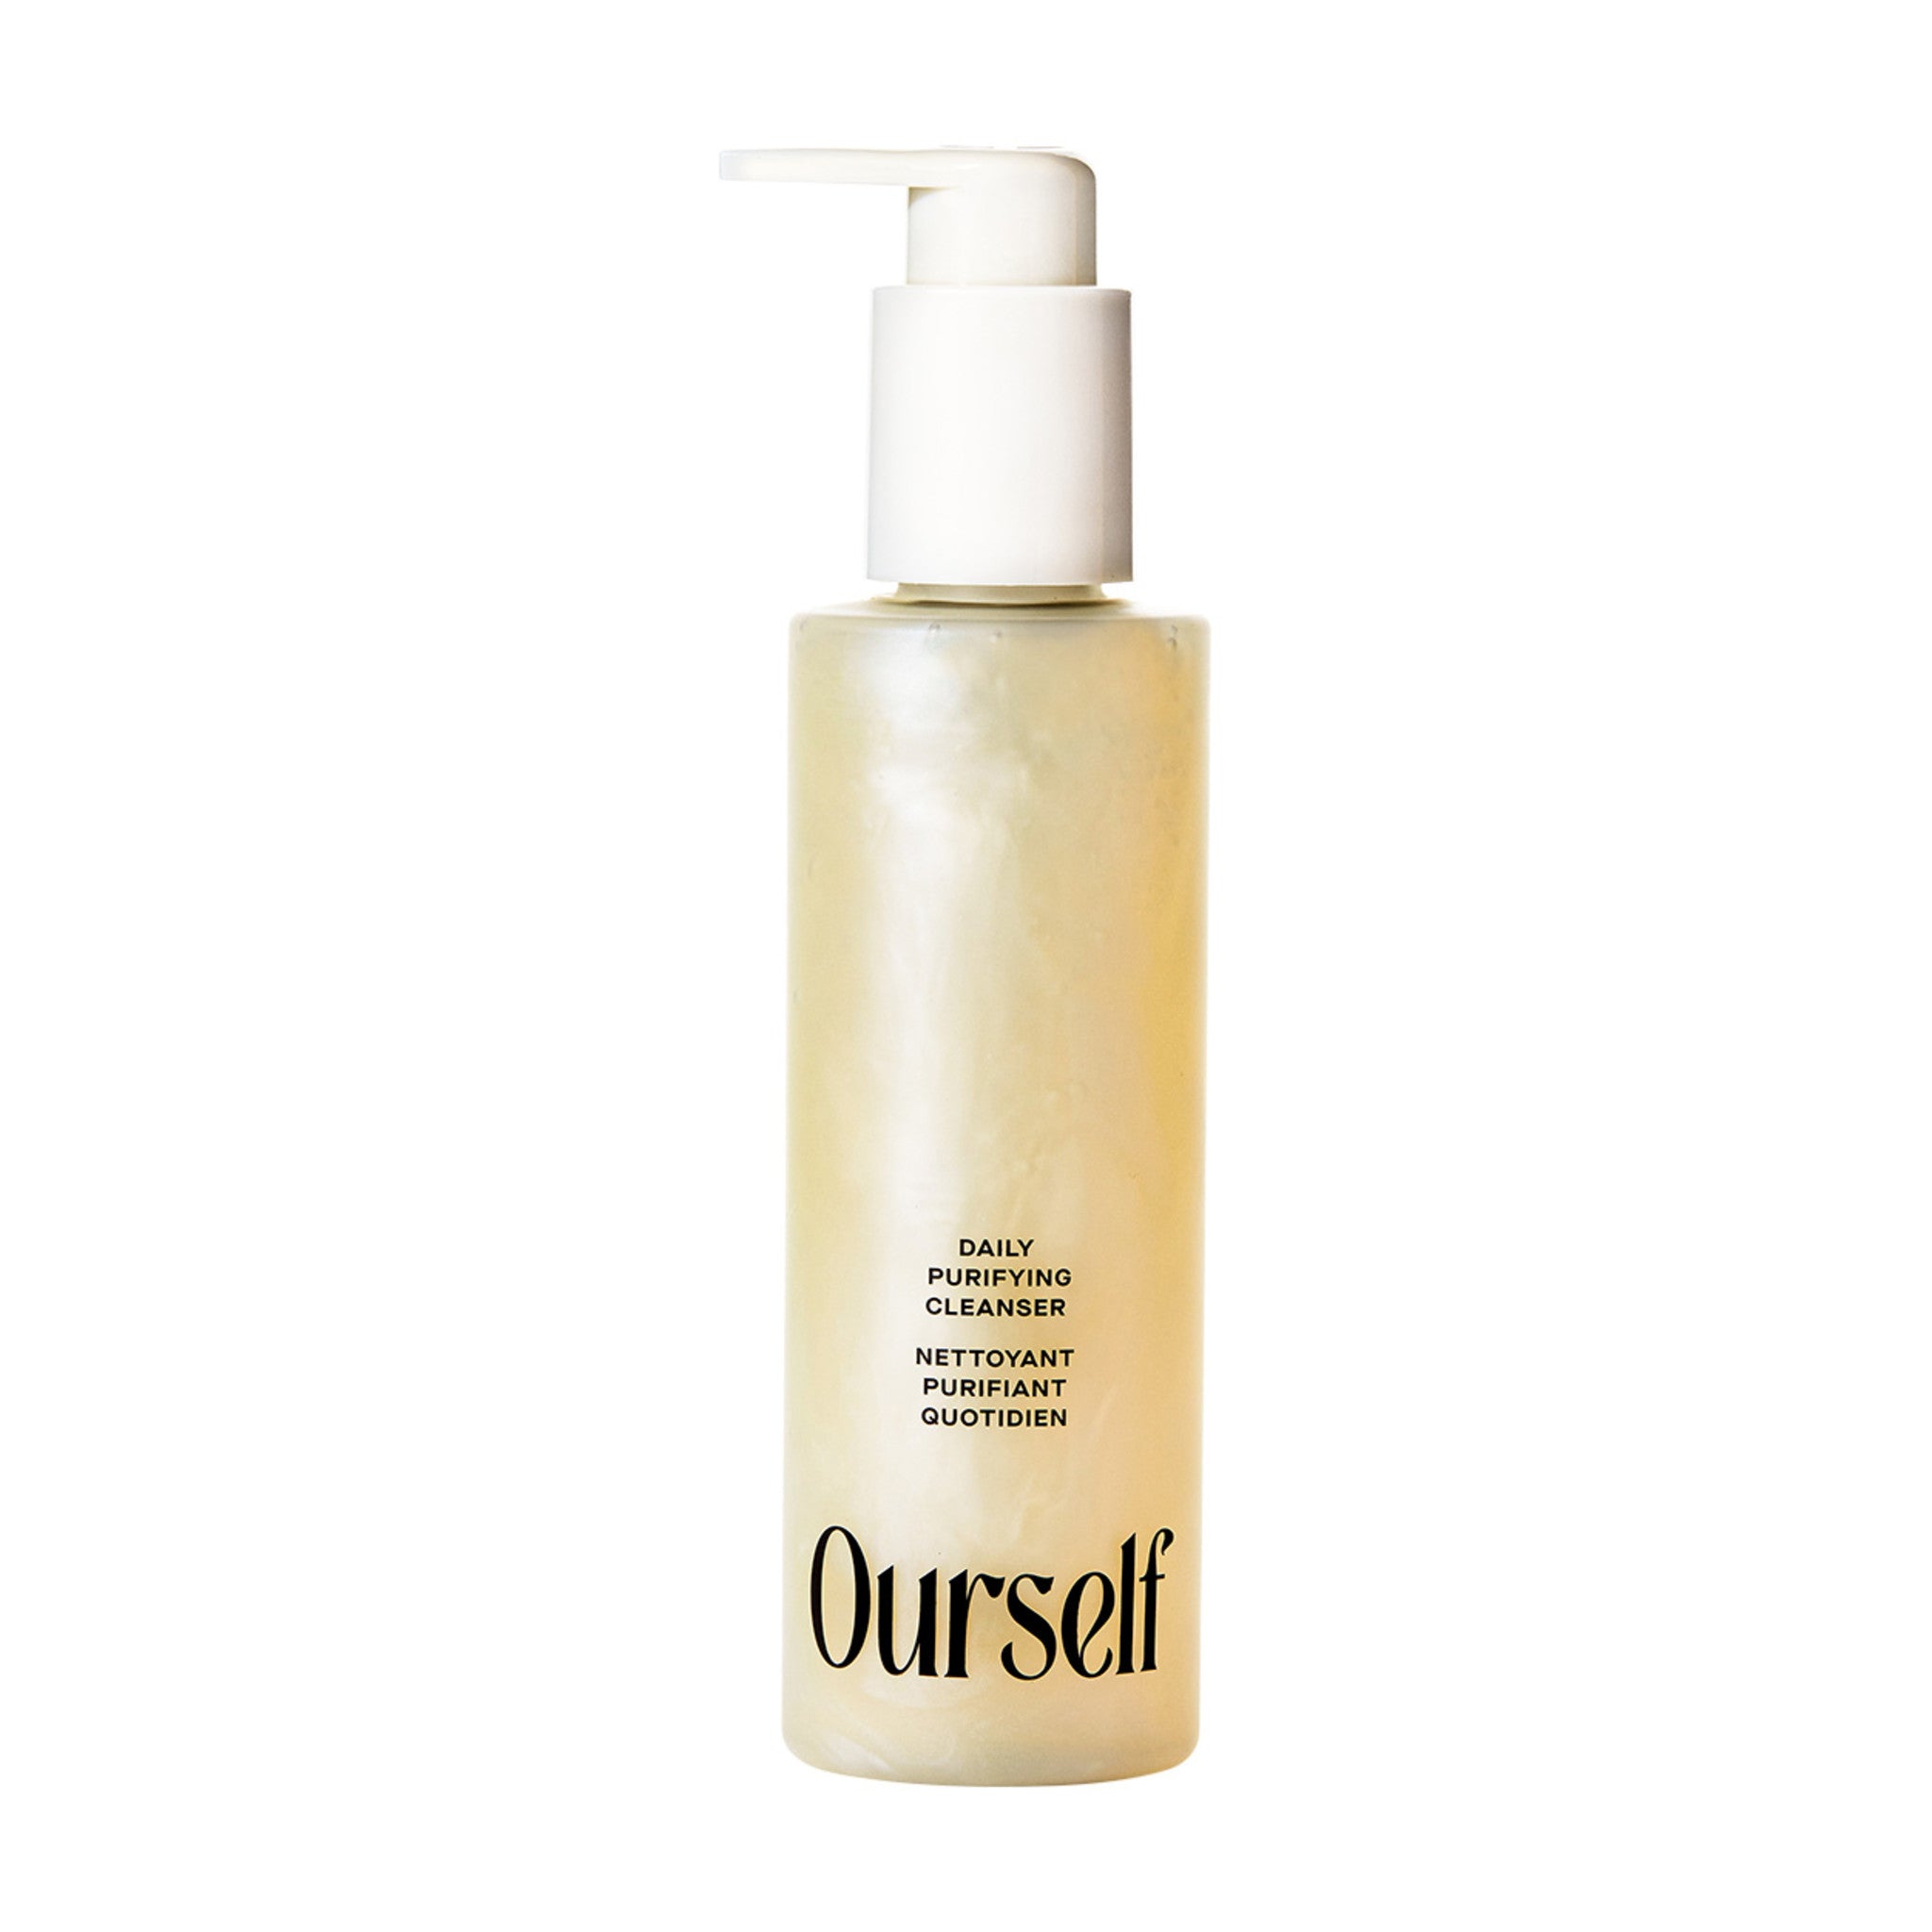 Ourself Daily Purifying Cleanser main image.